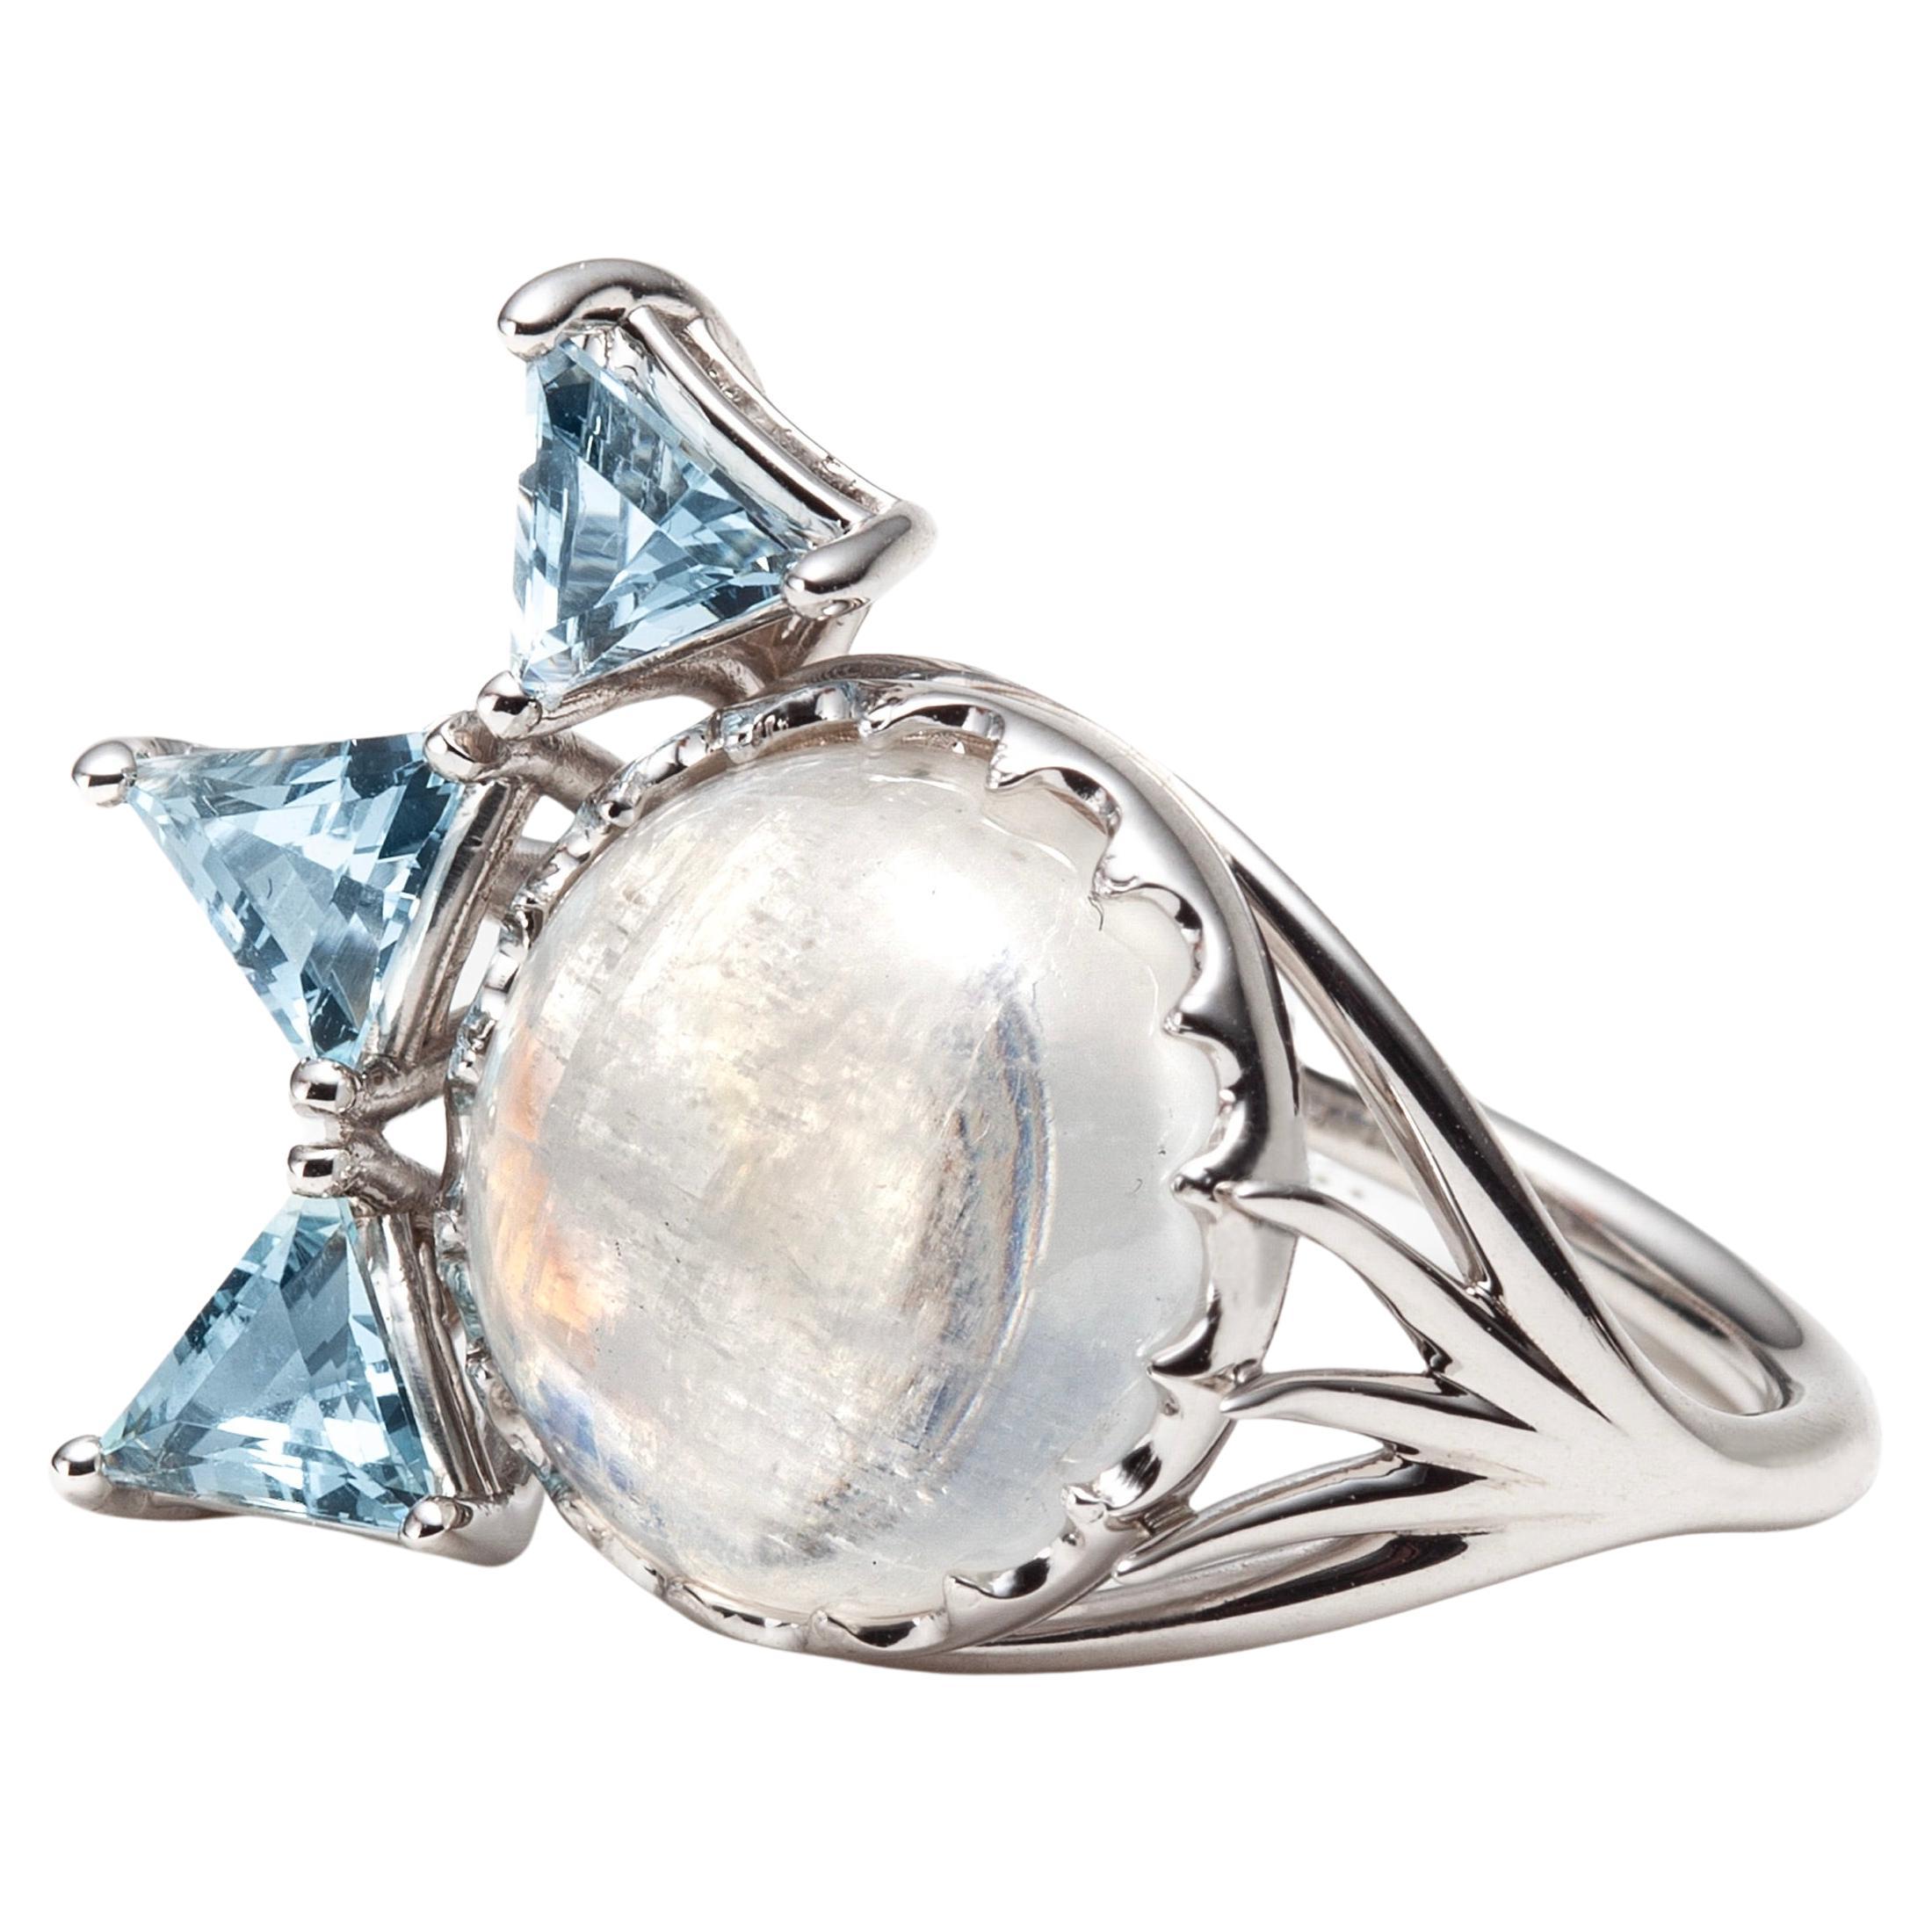 14k White Gold Ring set with a Moonstone Cabochon and Triangular Aquamarines